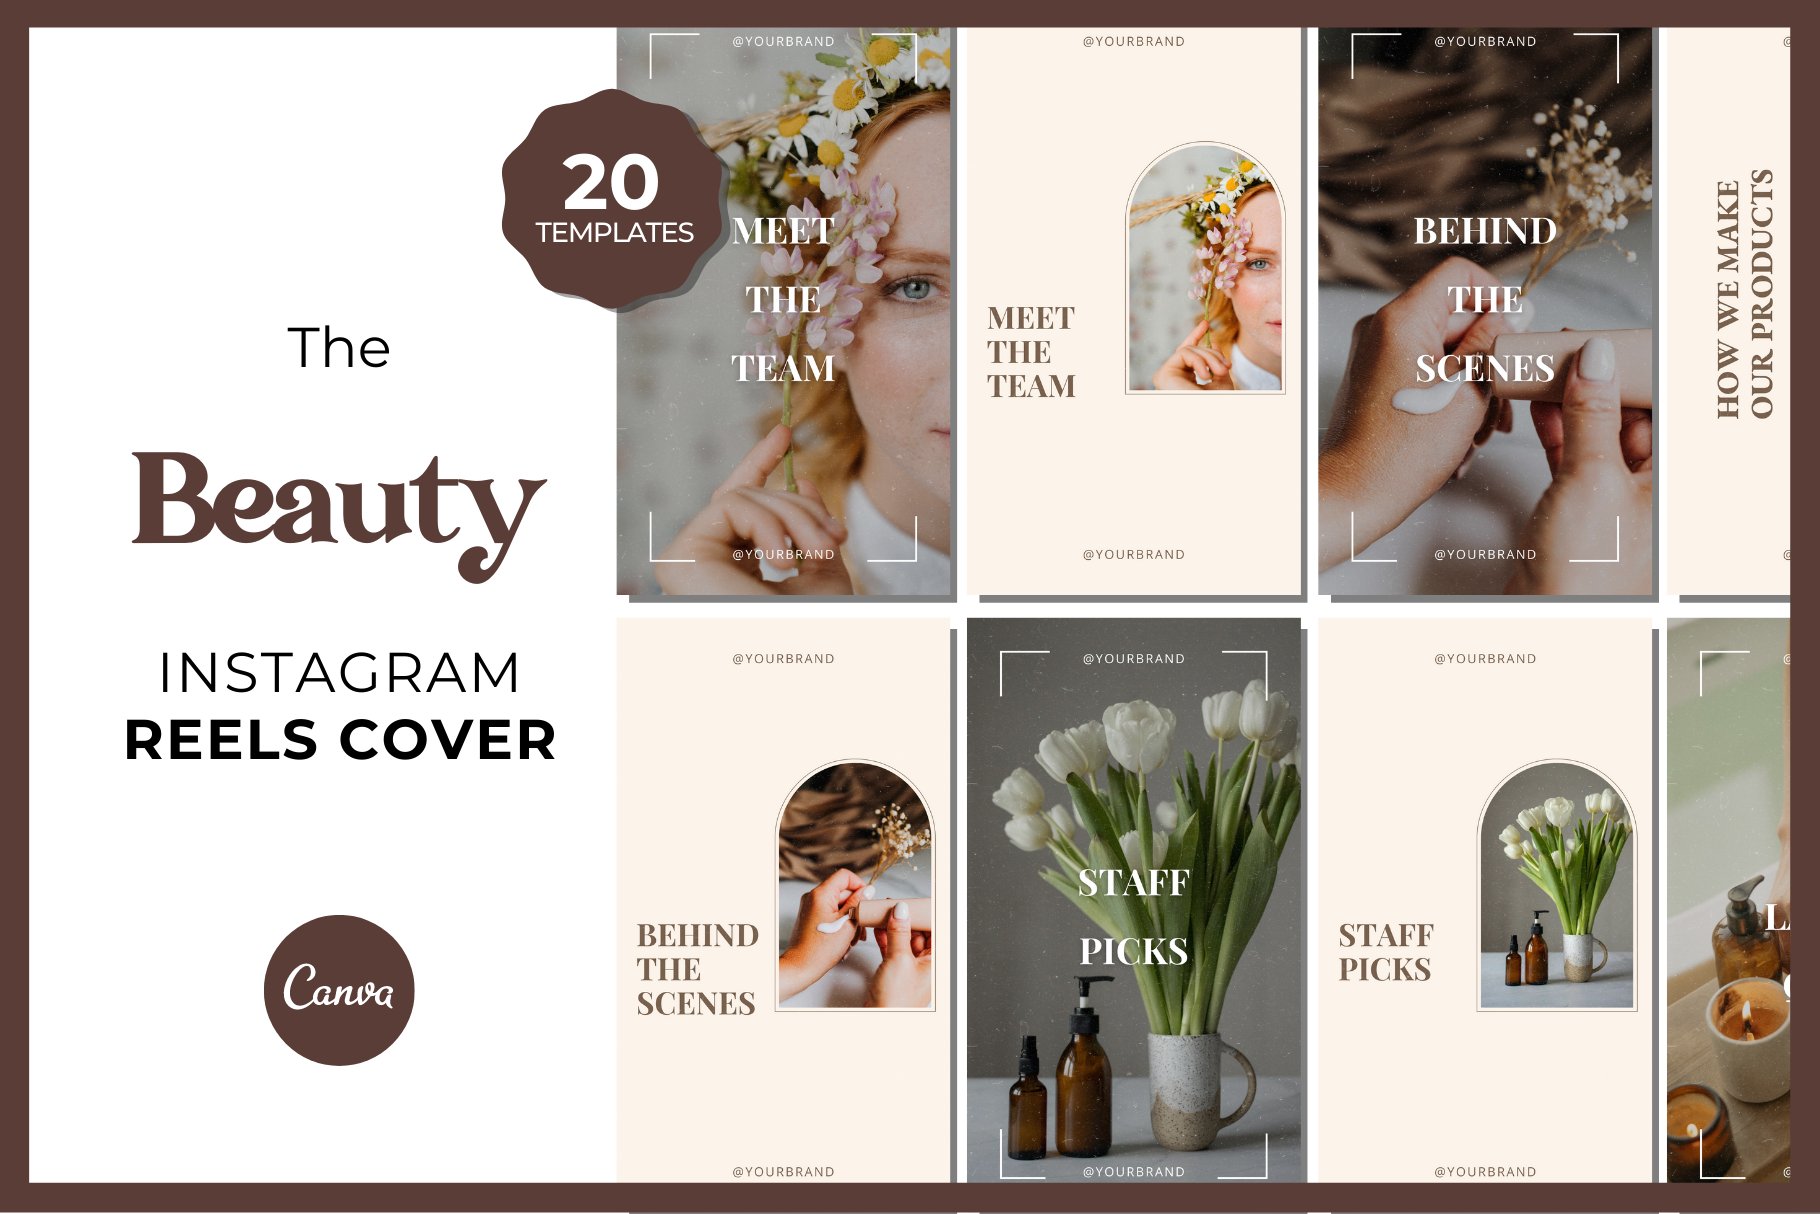 20 Beauty Instagram Reels Cover cover image.